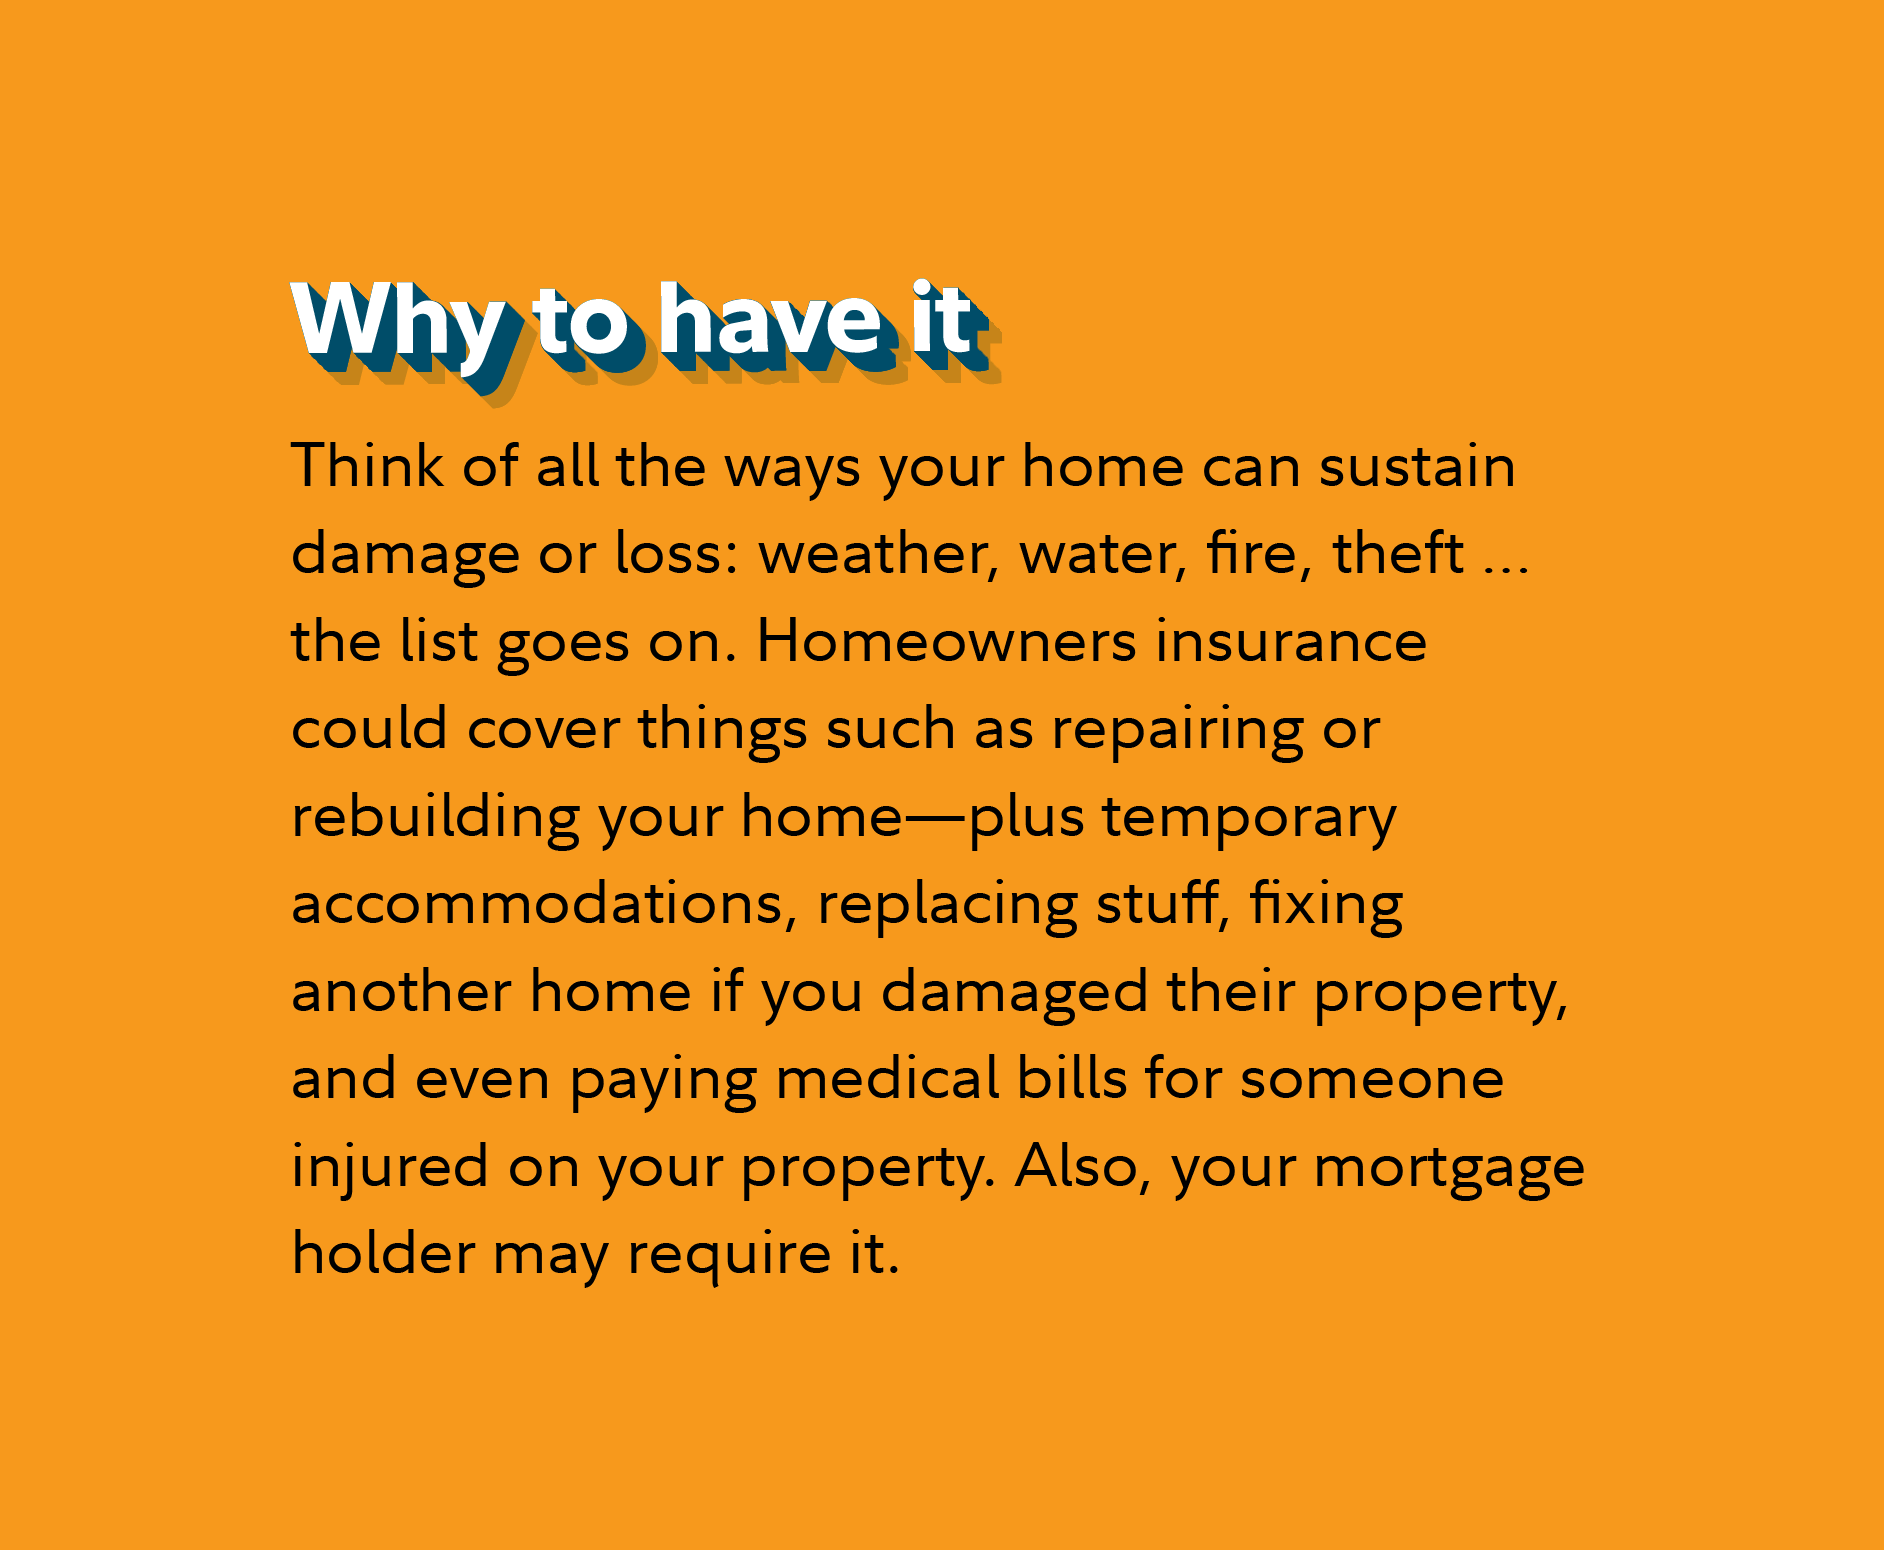 Why to have it Think of all the ways your home can sustain damage or loss: weather, water, fire, theft … the list goes on. Homeowners insurance could cover things such as repairing or rebuilding your home—plus temporary accommodations, replacing stuff, fixing another home if you damaged their property, and even paying medical bills for someone injured on your property. Also, your mortgage holder may require it.